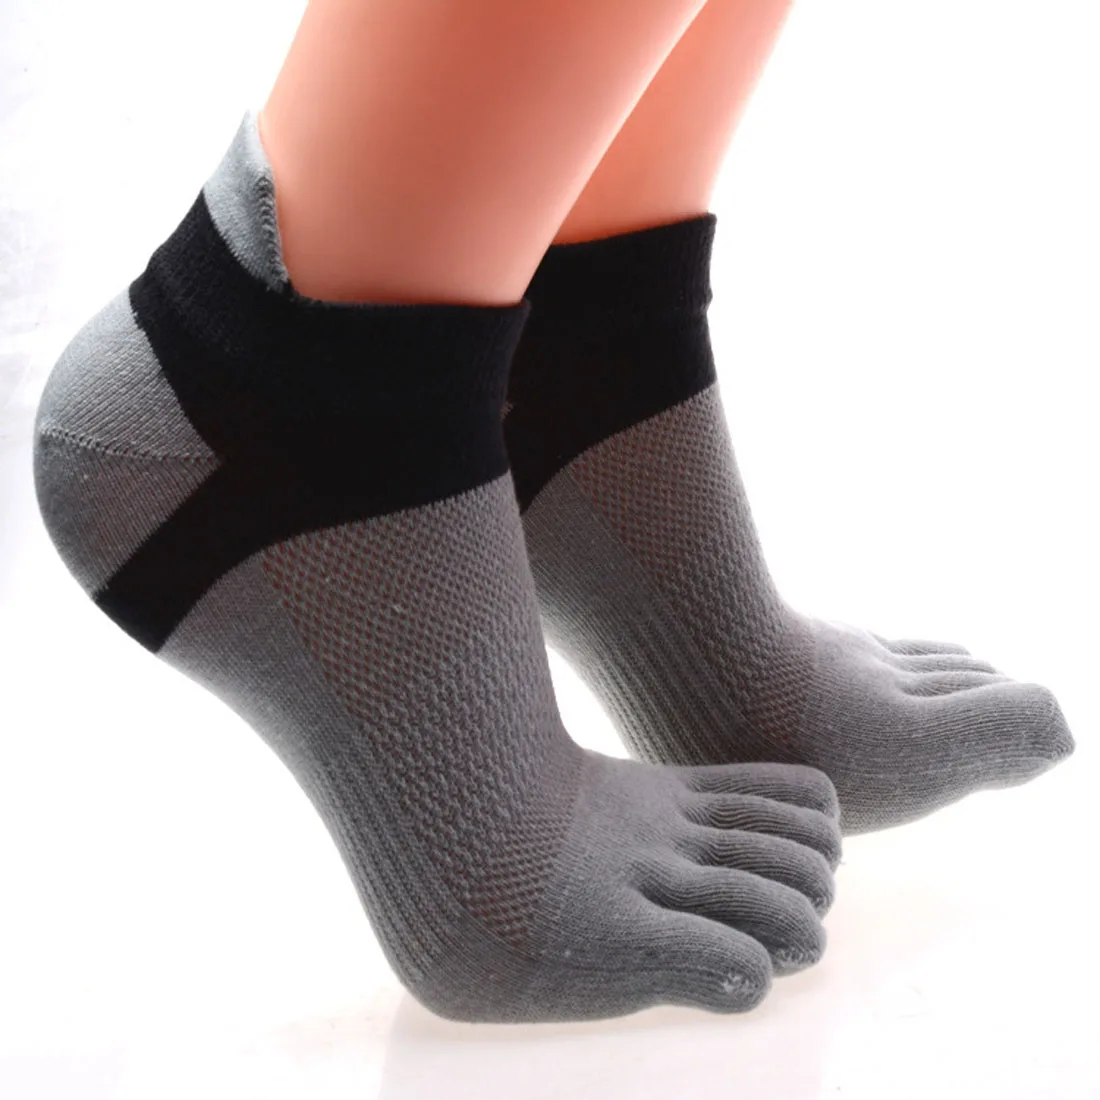 

Pure Cotton Five Finger No Show Socks Mens Sports Breathable Comfortable Shaping Anti Friction Ankle Socks With Toes EU 38-43